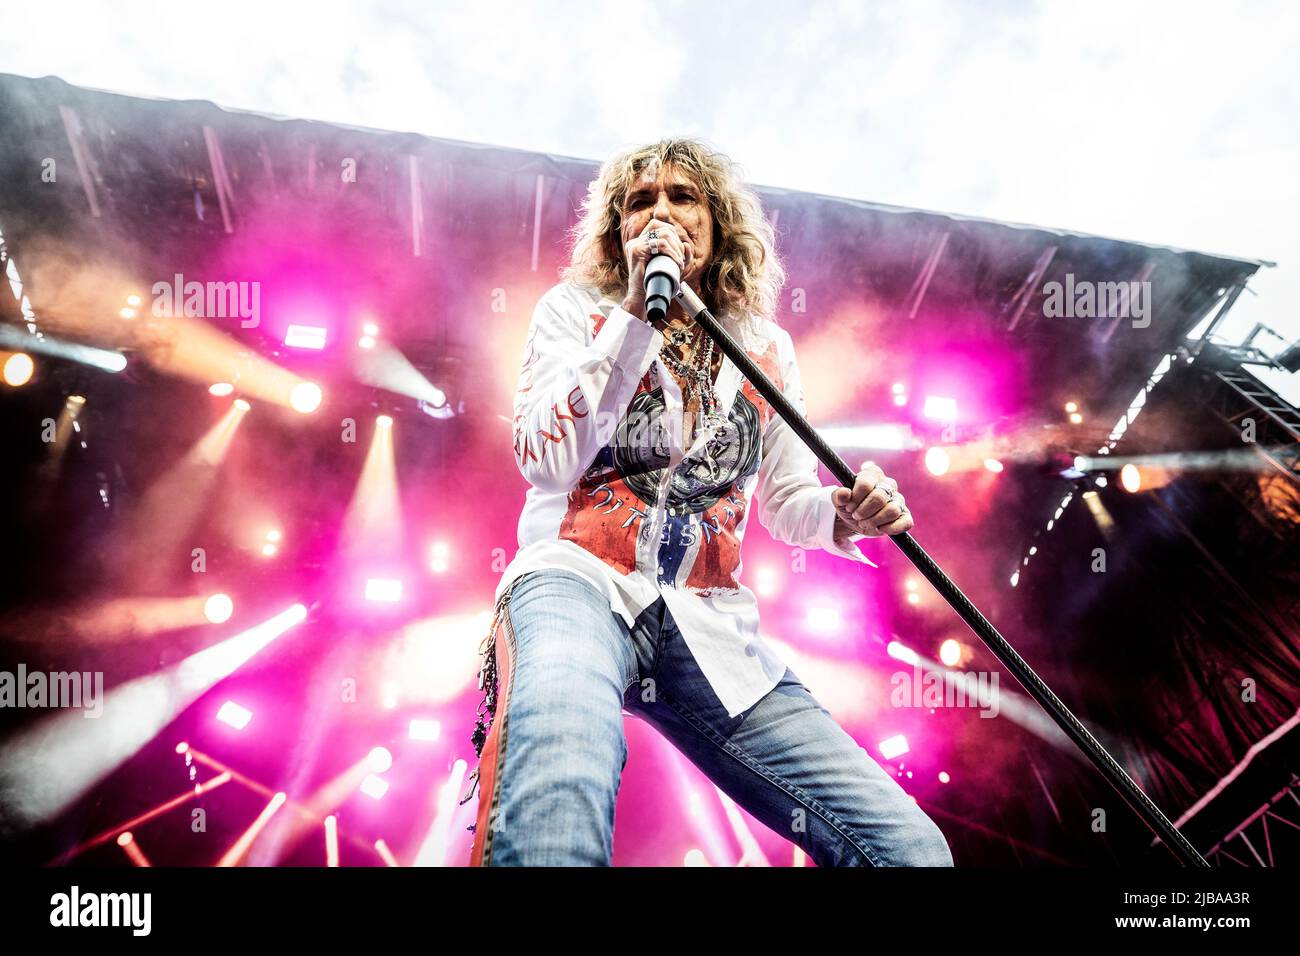 Hamer, Norway. 02nd, June 2022. The English rock band Whitesnake performs a live concert at Vikingeskipet in Hamar. Here vocalist David Coverdale is seen live on stage. (Photo credit: Gonzales Photo - Terje Dokken). Stock Photo